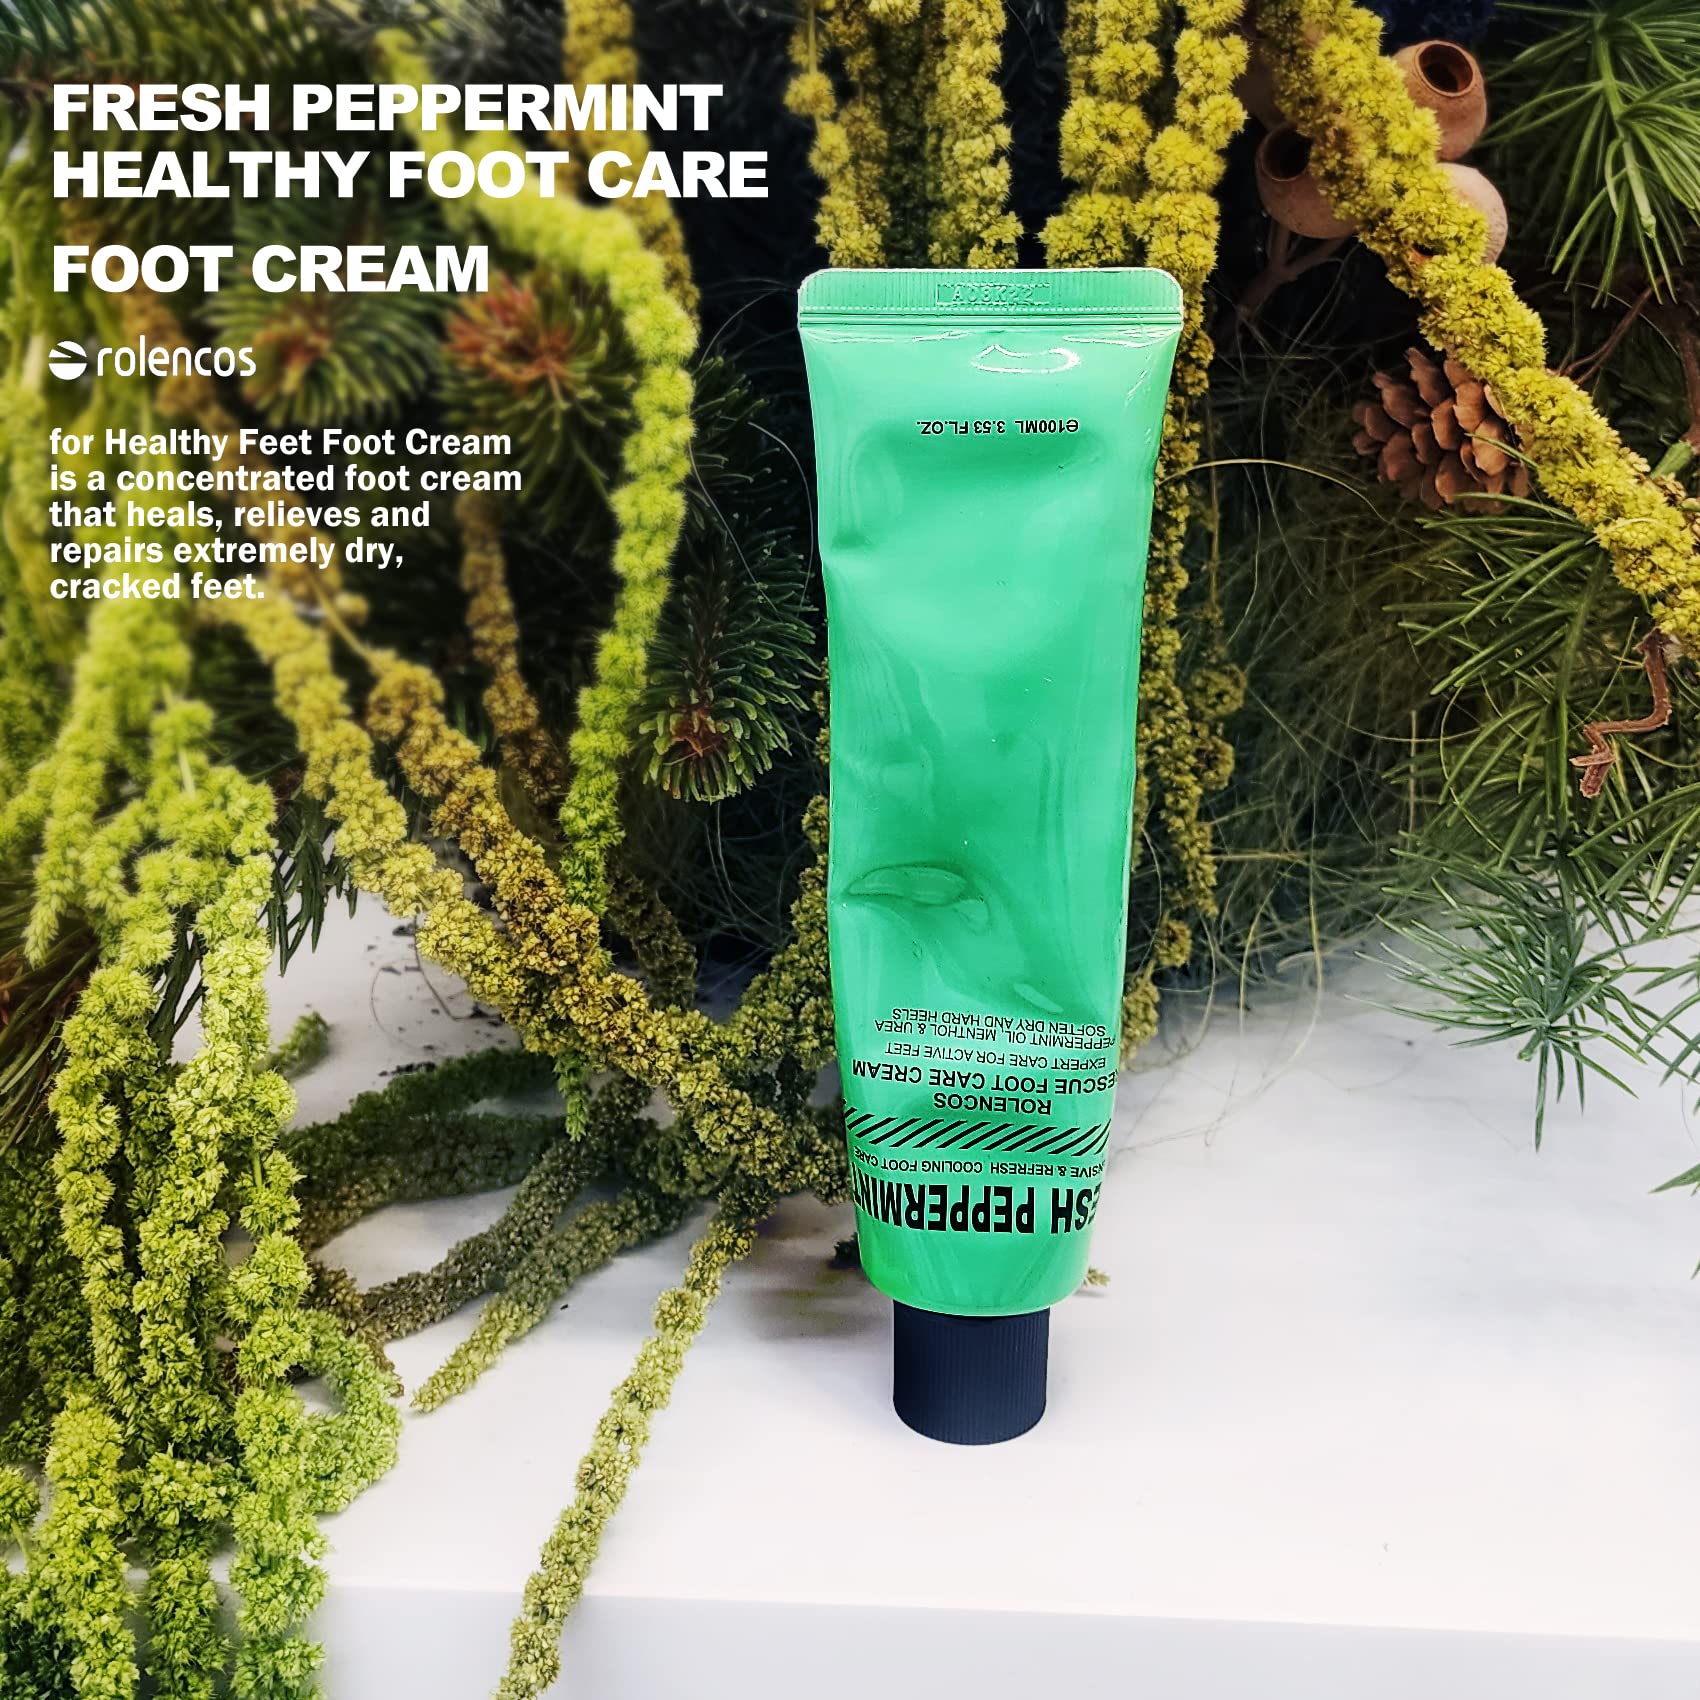 rolencos Peppermint Cooling Moisturizing Foot Cream 3.53oz, Callus Remover, Thick, Cracked, Rough, Dead and Dry, Hard Feet, Heels, Soles, Professional Crack Foot Care Rescue Cream